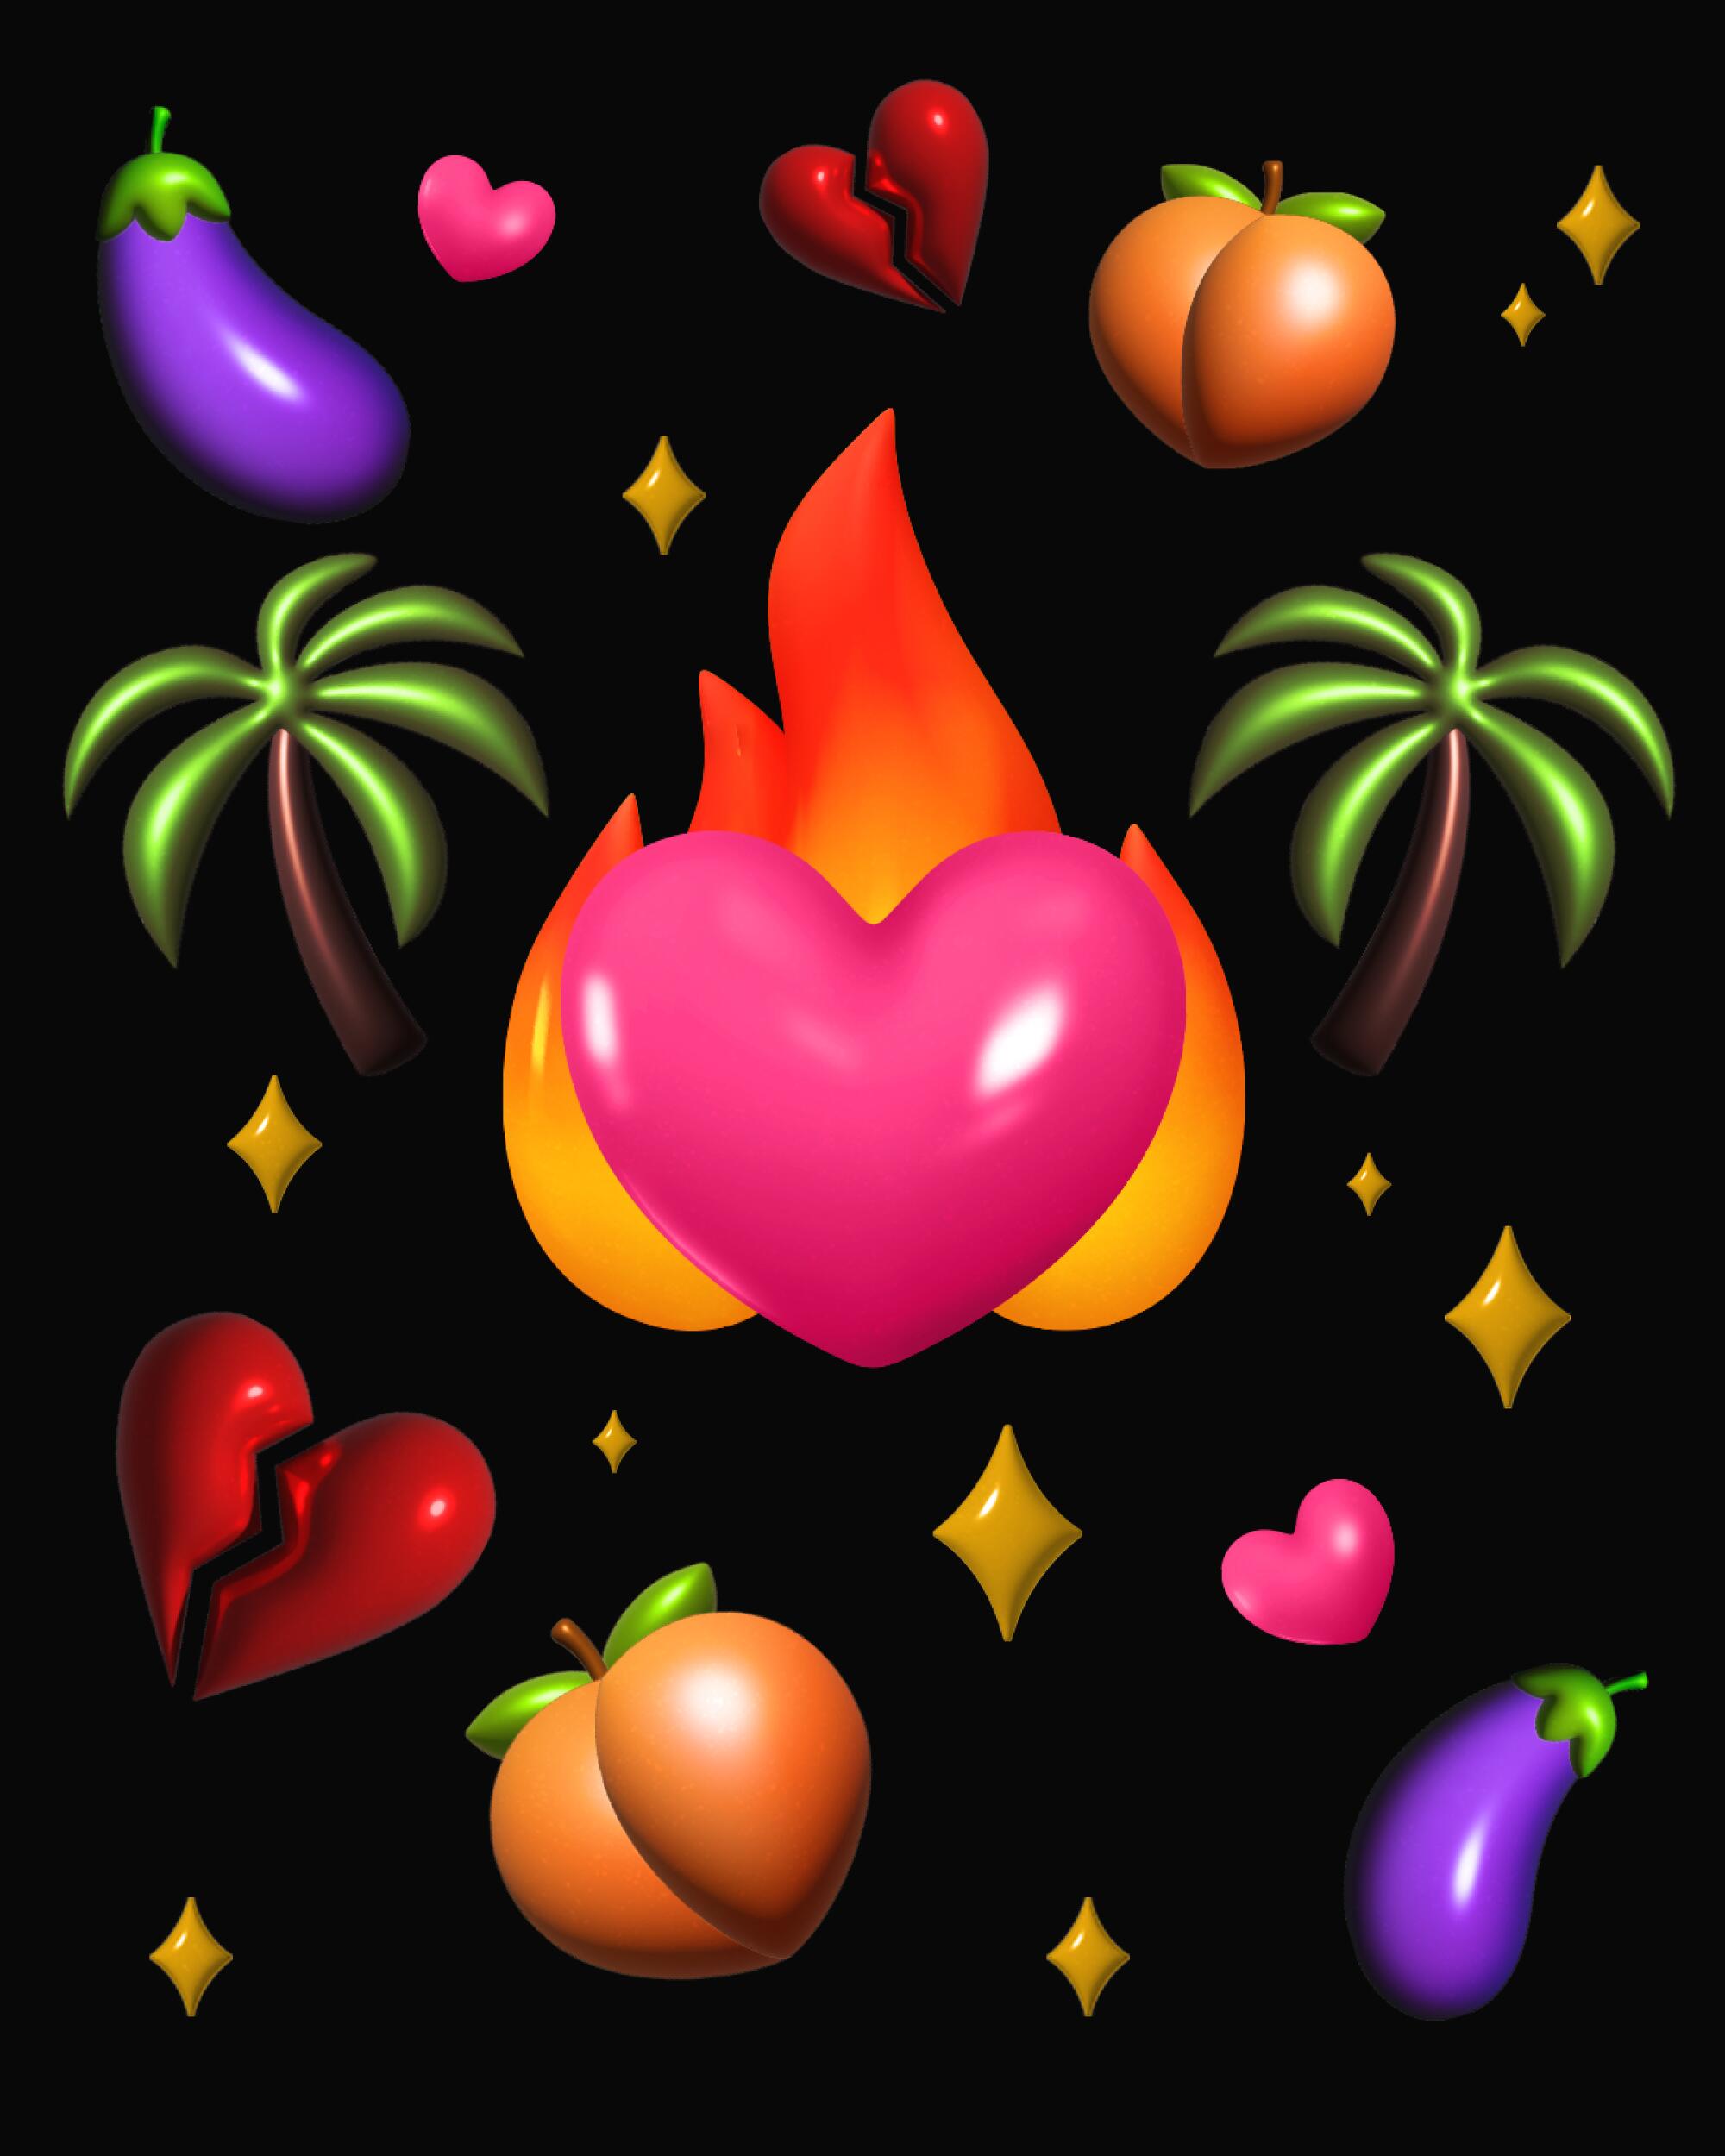 A multicolored illustration of a flaming heart surrounded by palm trees, peaches, eggplants, diamonds and hearts, some broken